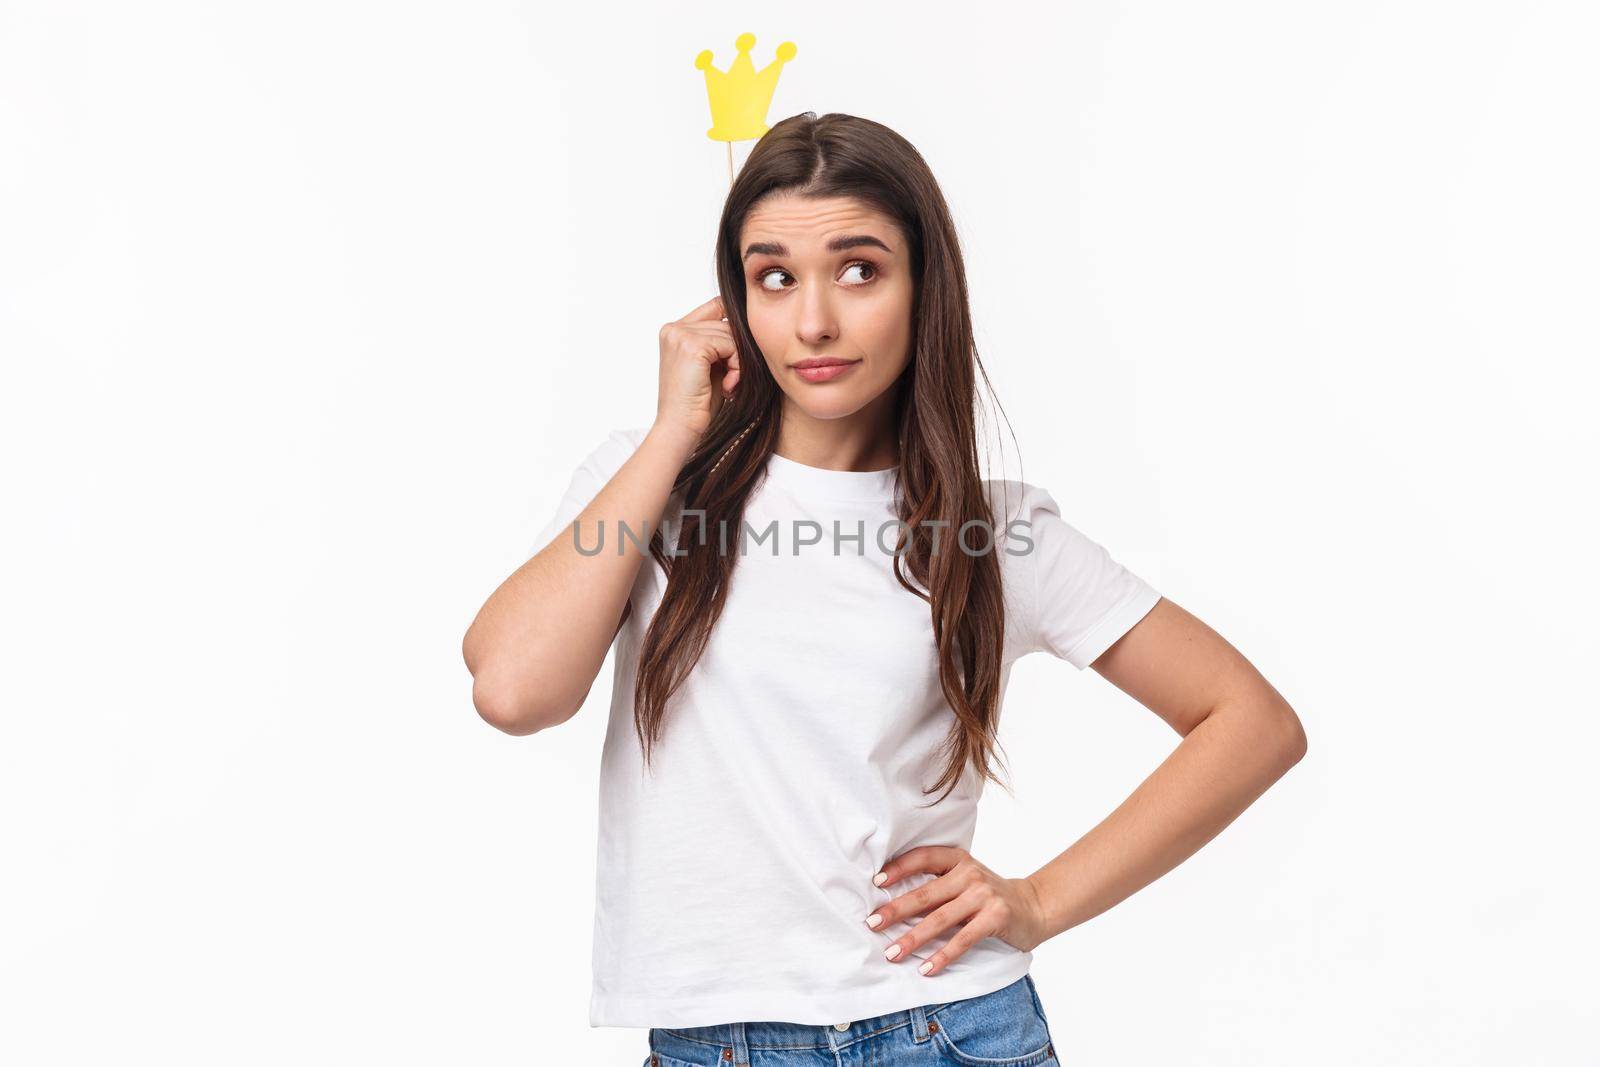 Entertainment, fun and holidays concept. Portrait of sassy and classy good-looking girl in t-shirt, holding carnaval stick with crown, acting like queen or super star, standing white background.